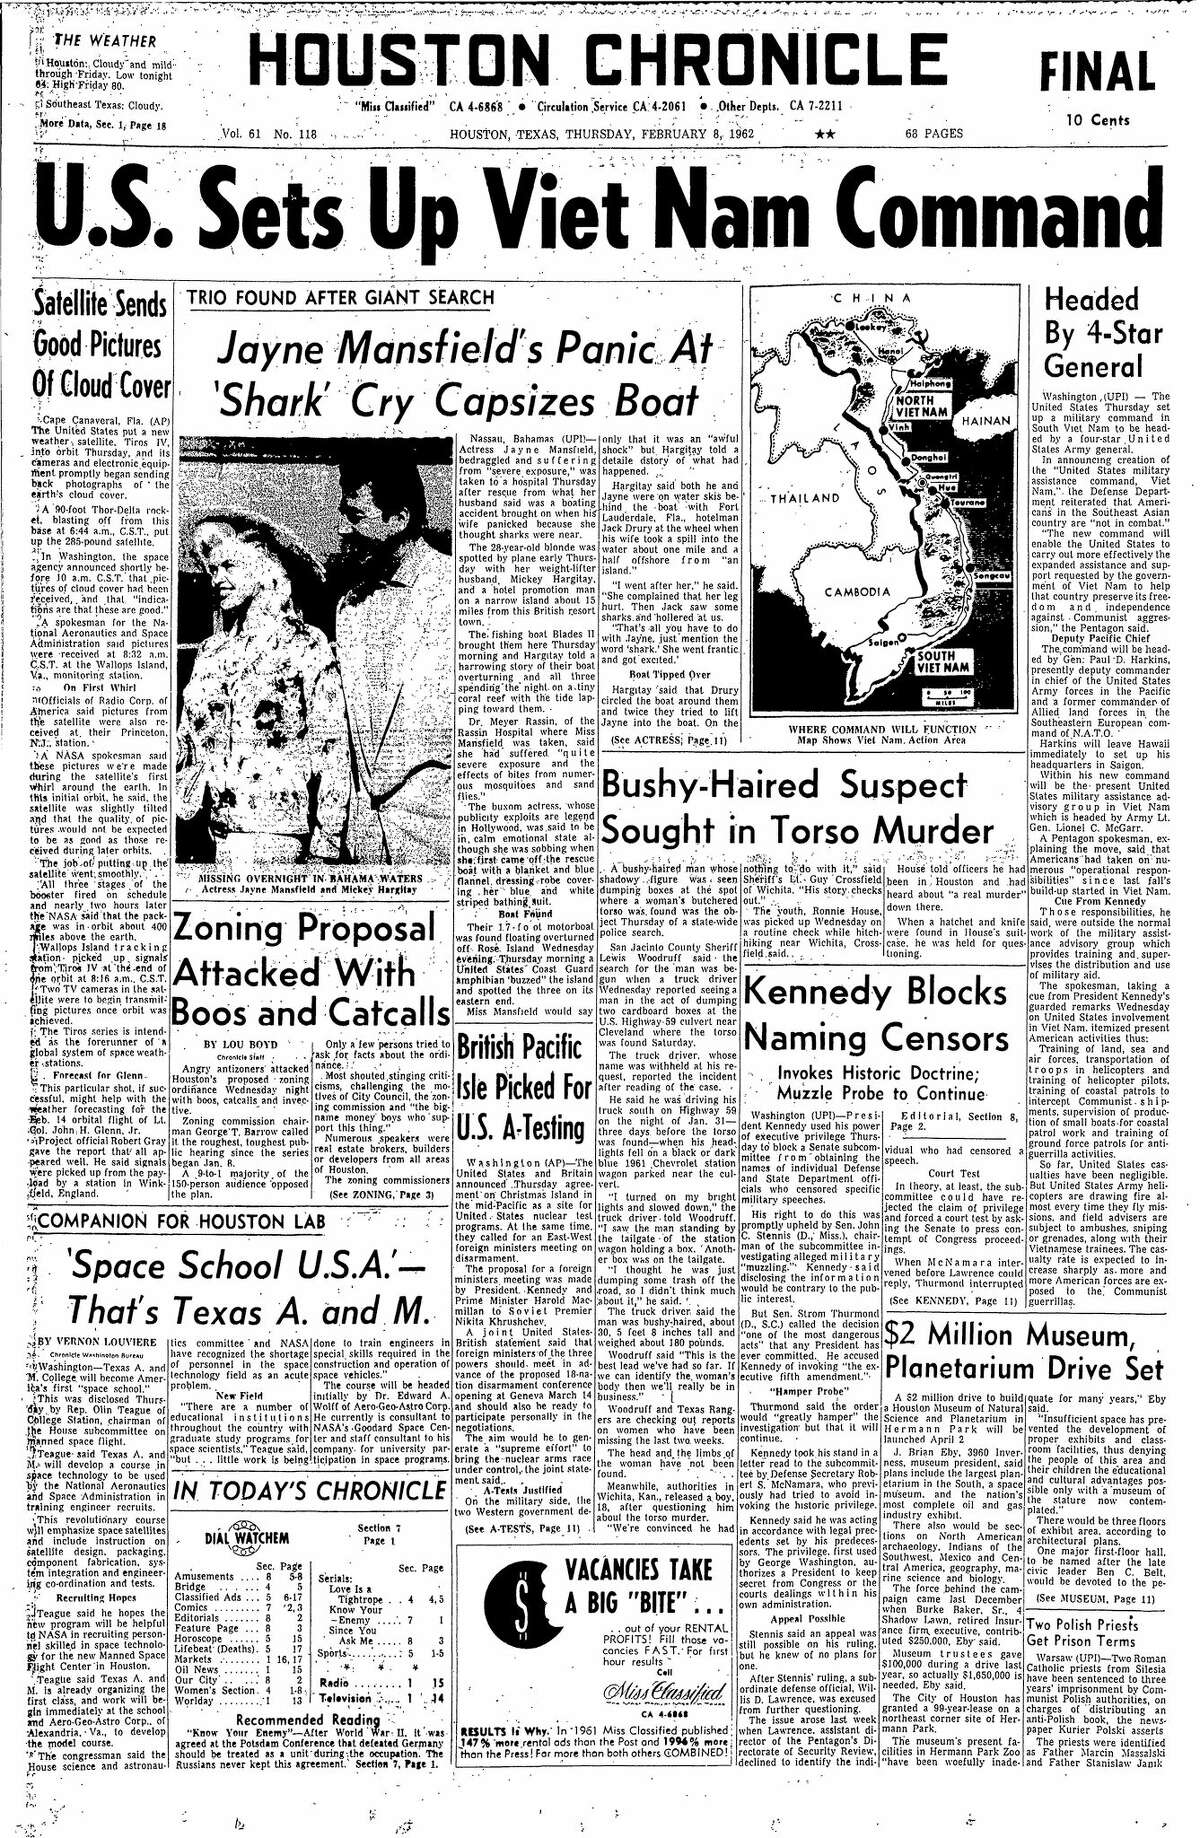 Houston Chronicle front page from Feb. 2, 1962.